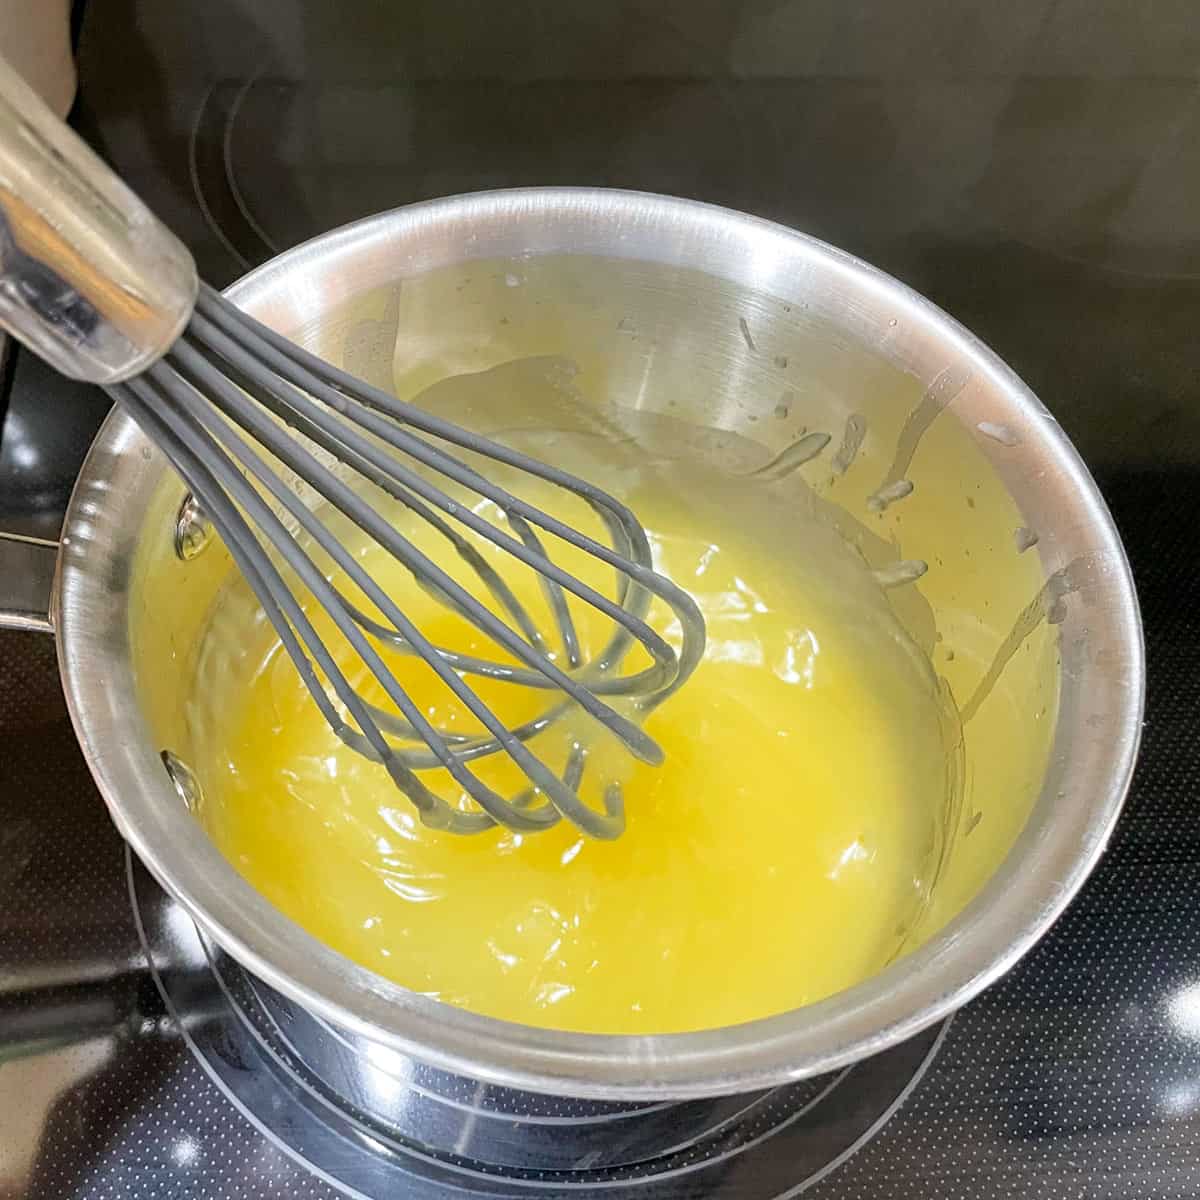 Curd after whisking for 5 minutes and before eggs are added.